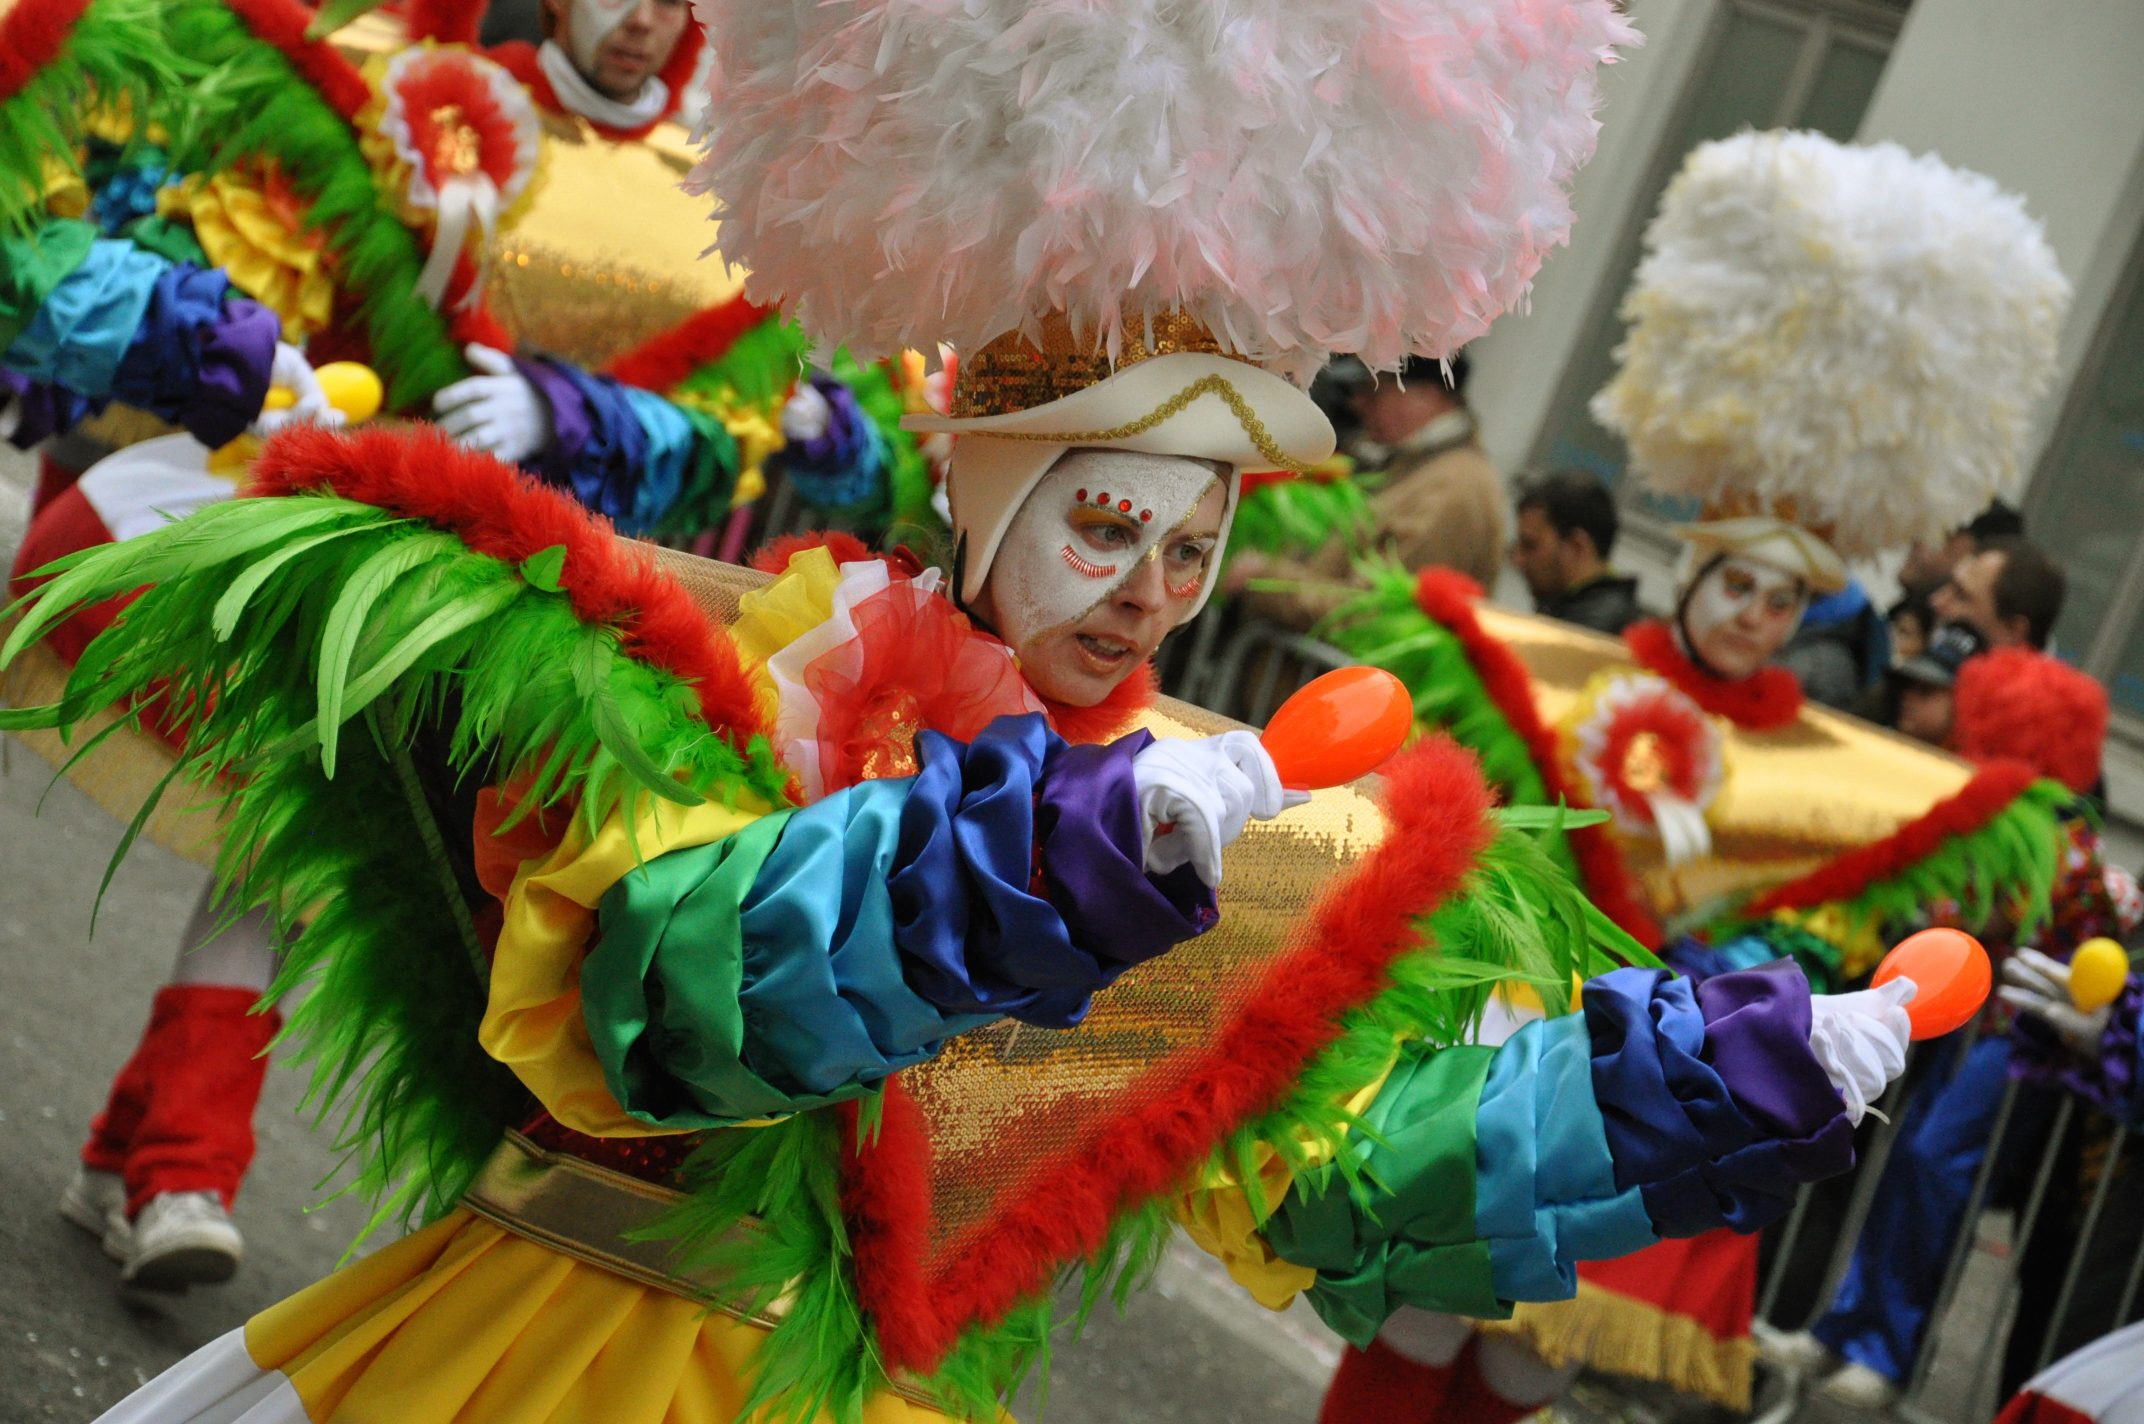 A group of people dancing in colorful costumes.